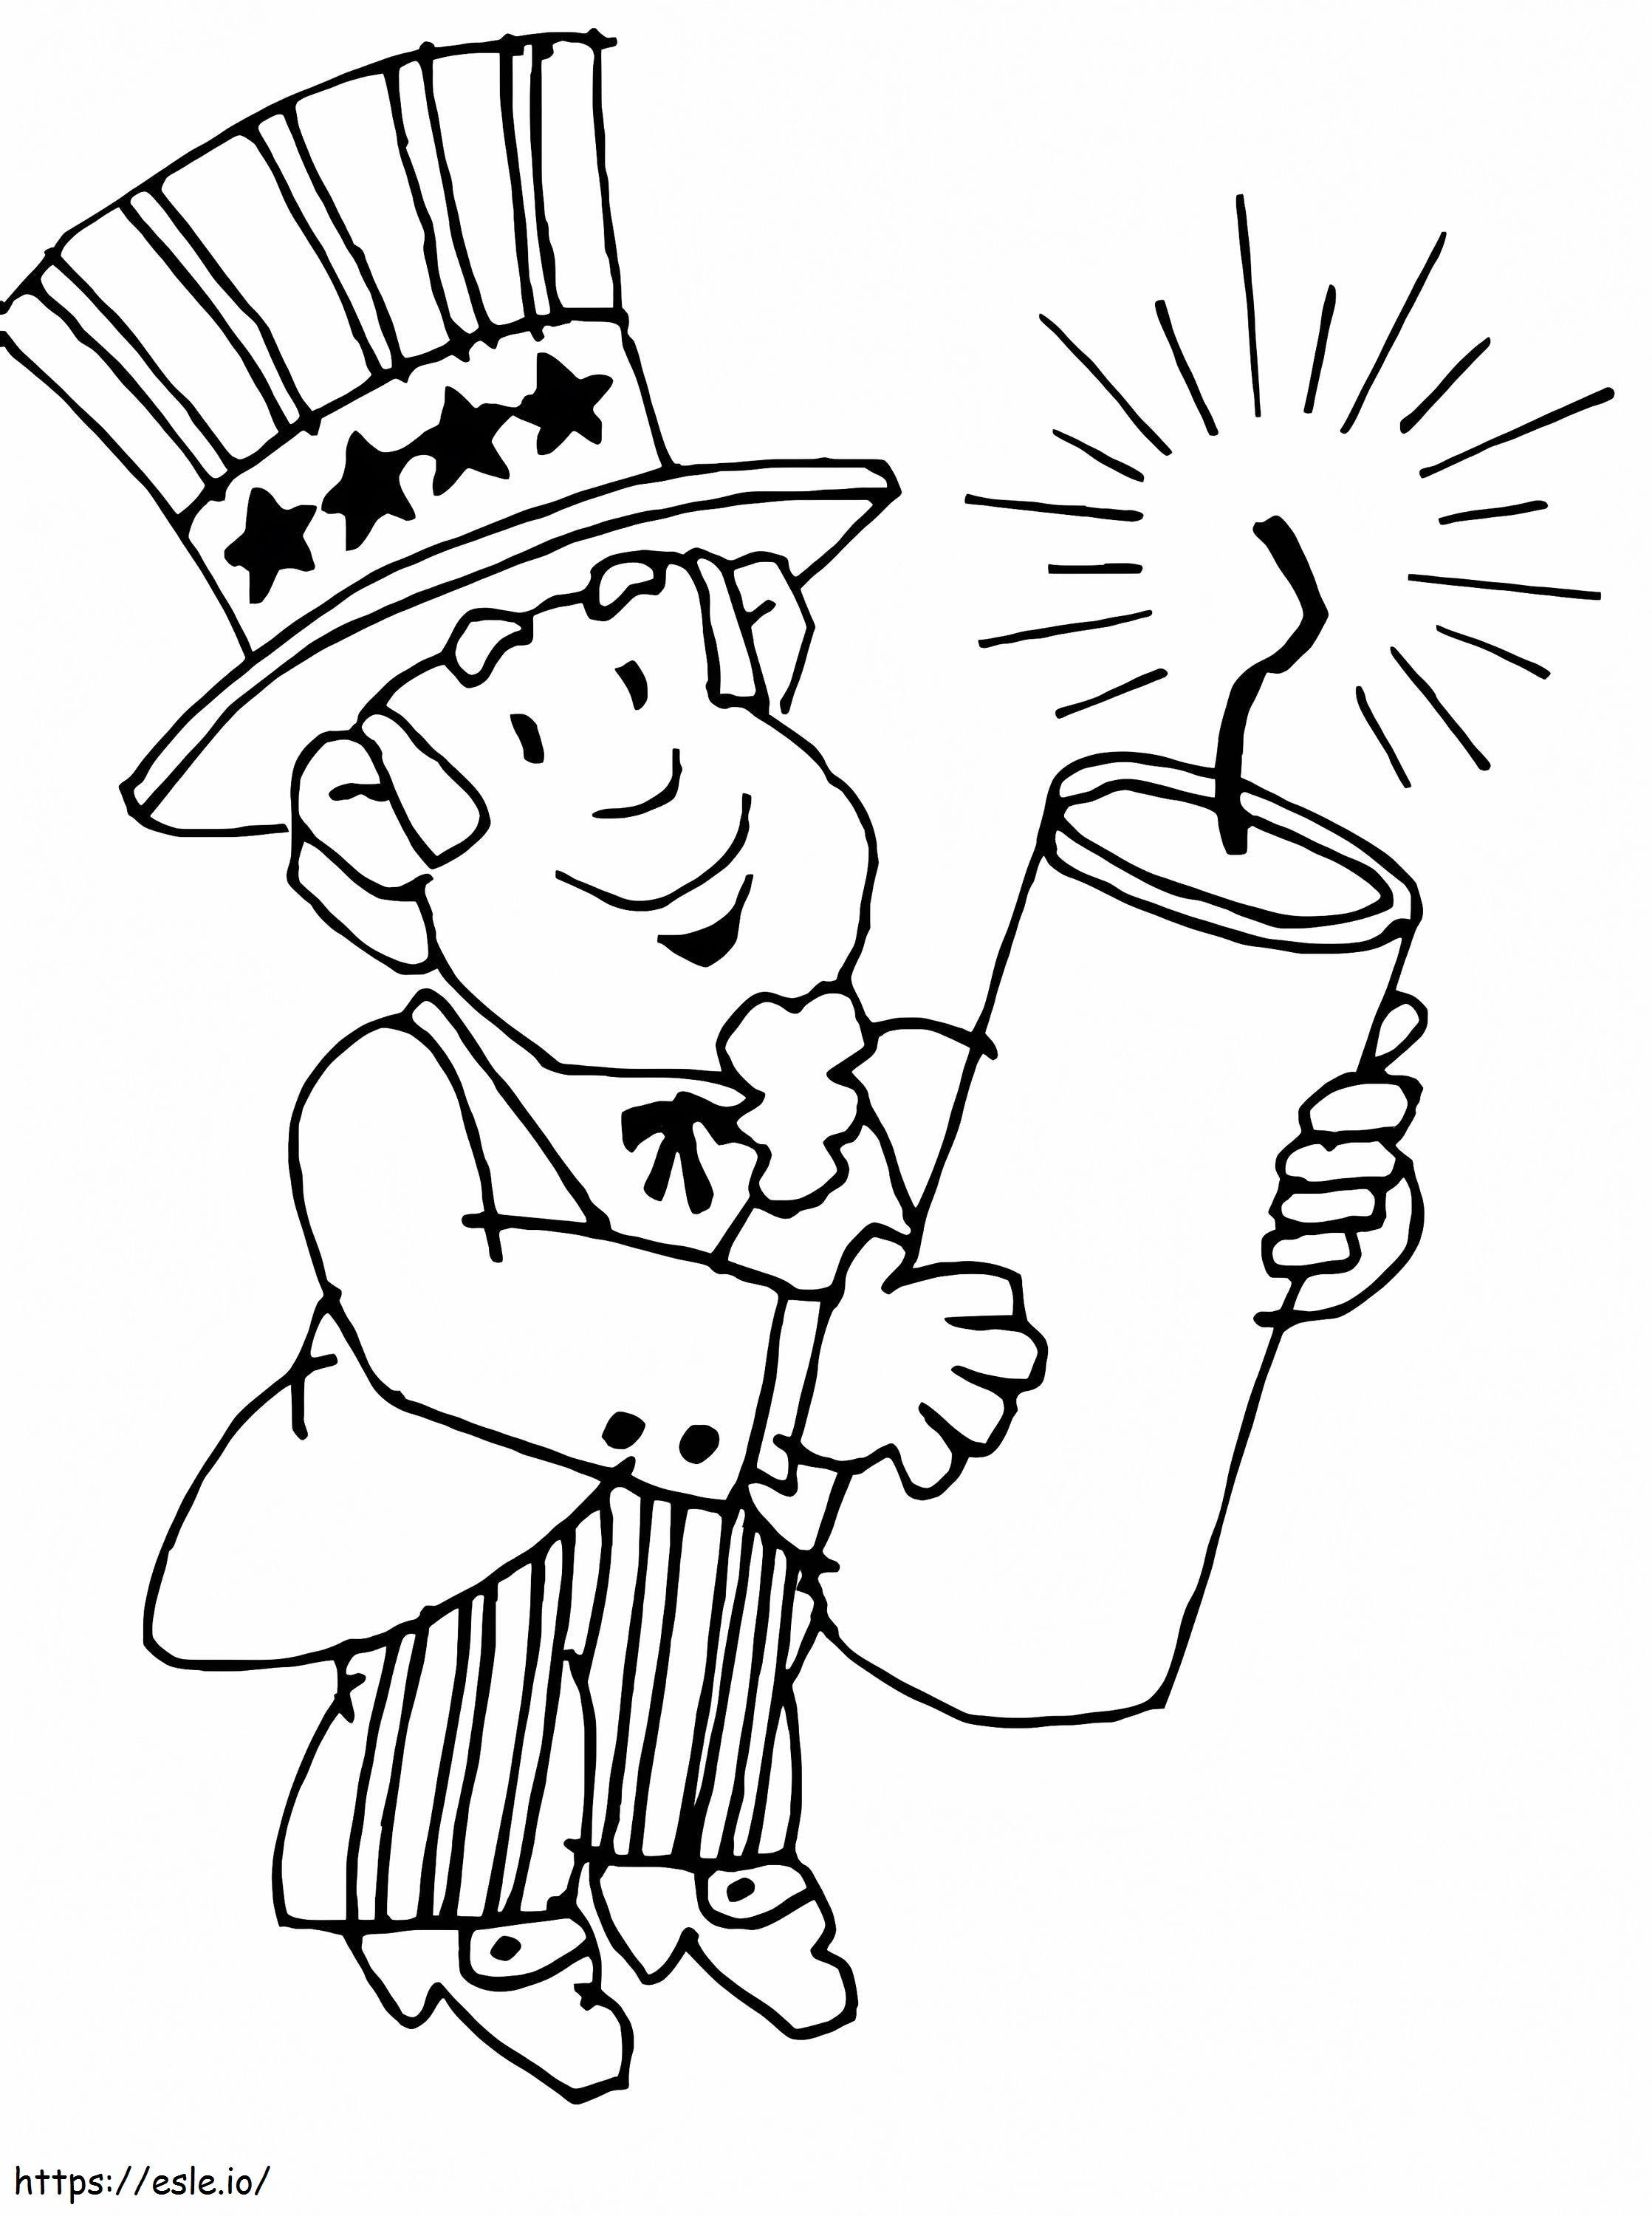 American Presidents Day coloring page